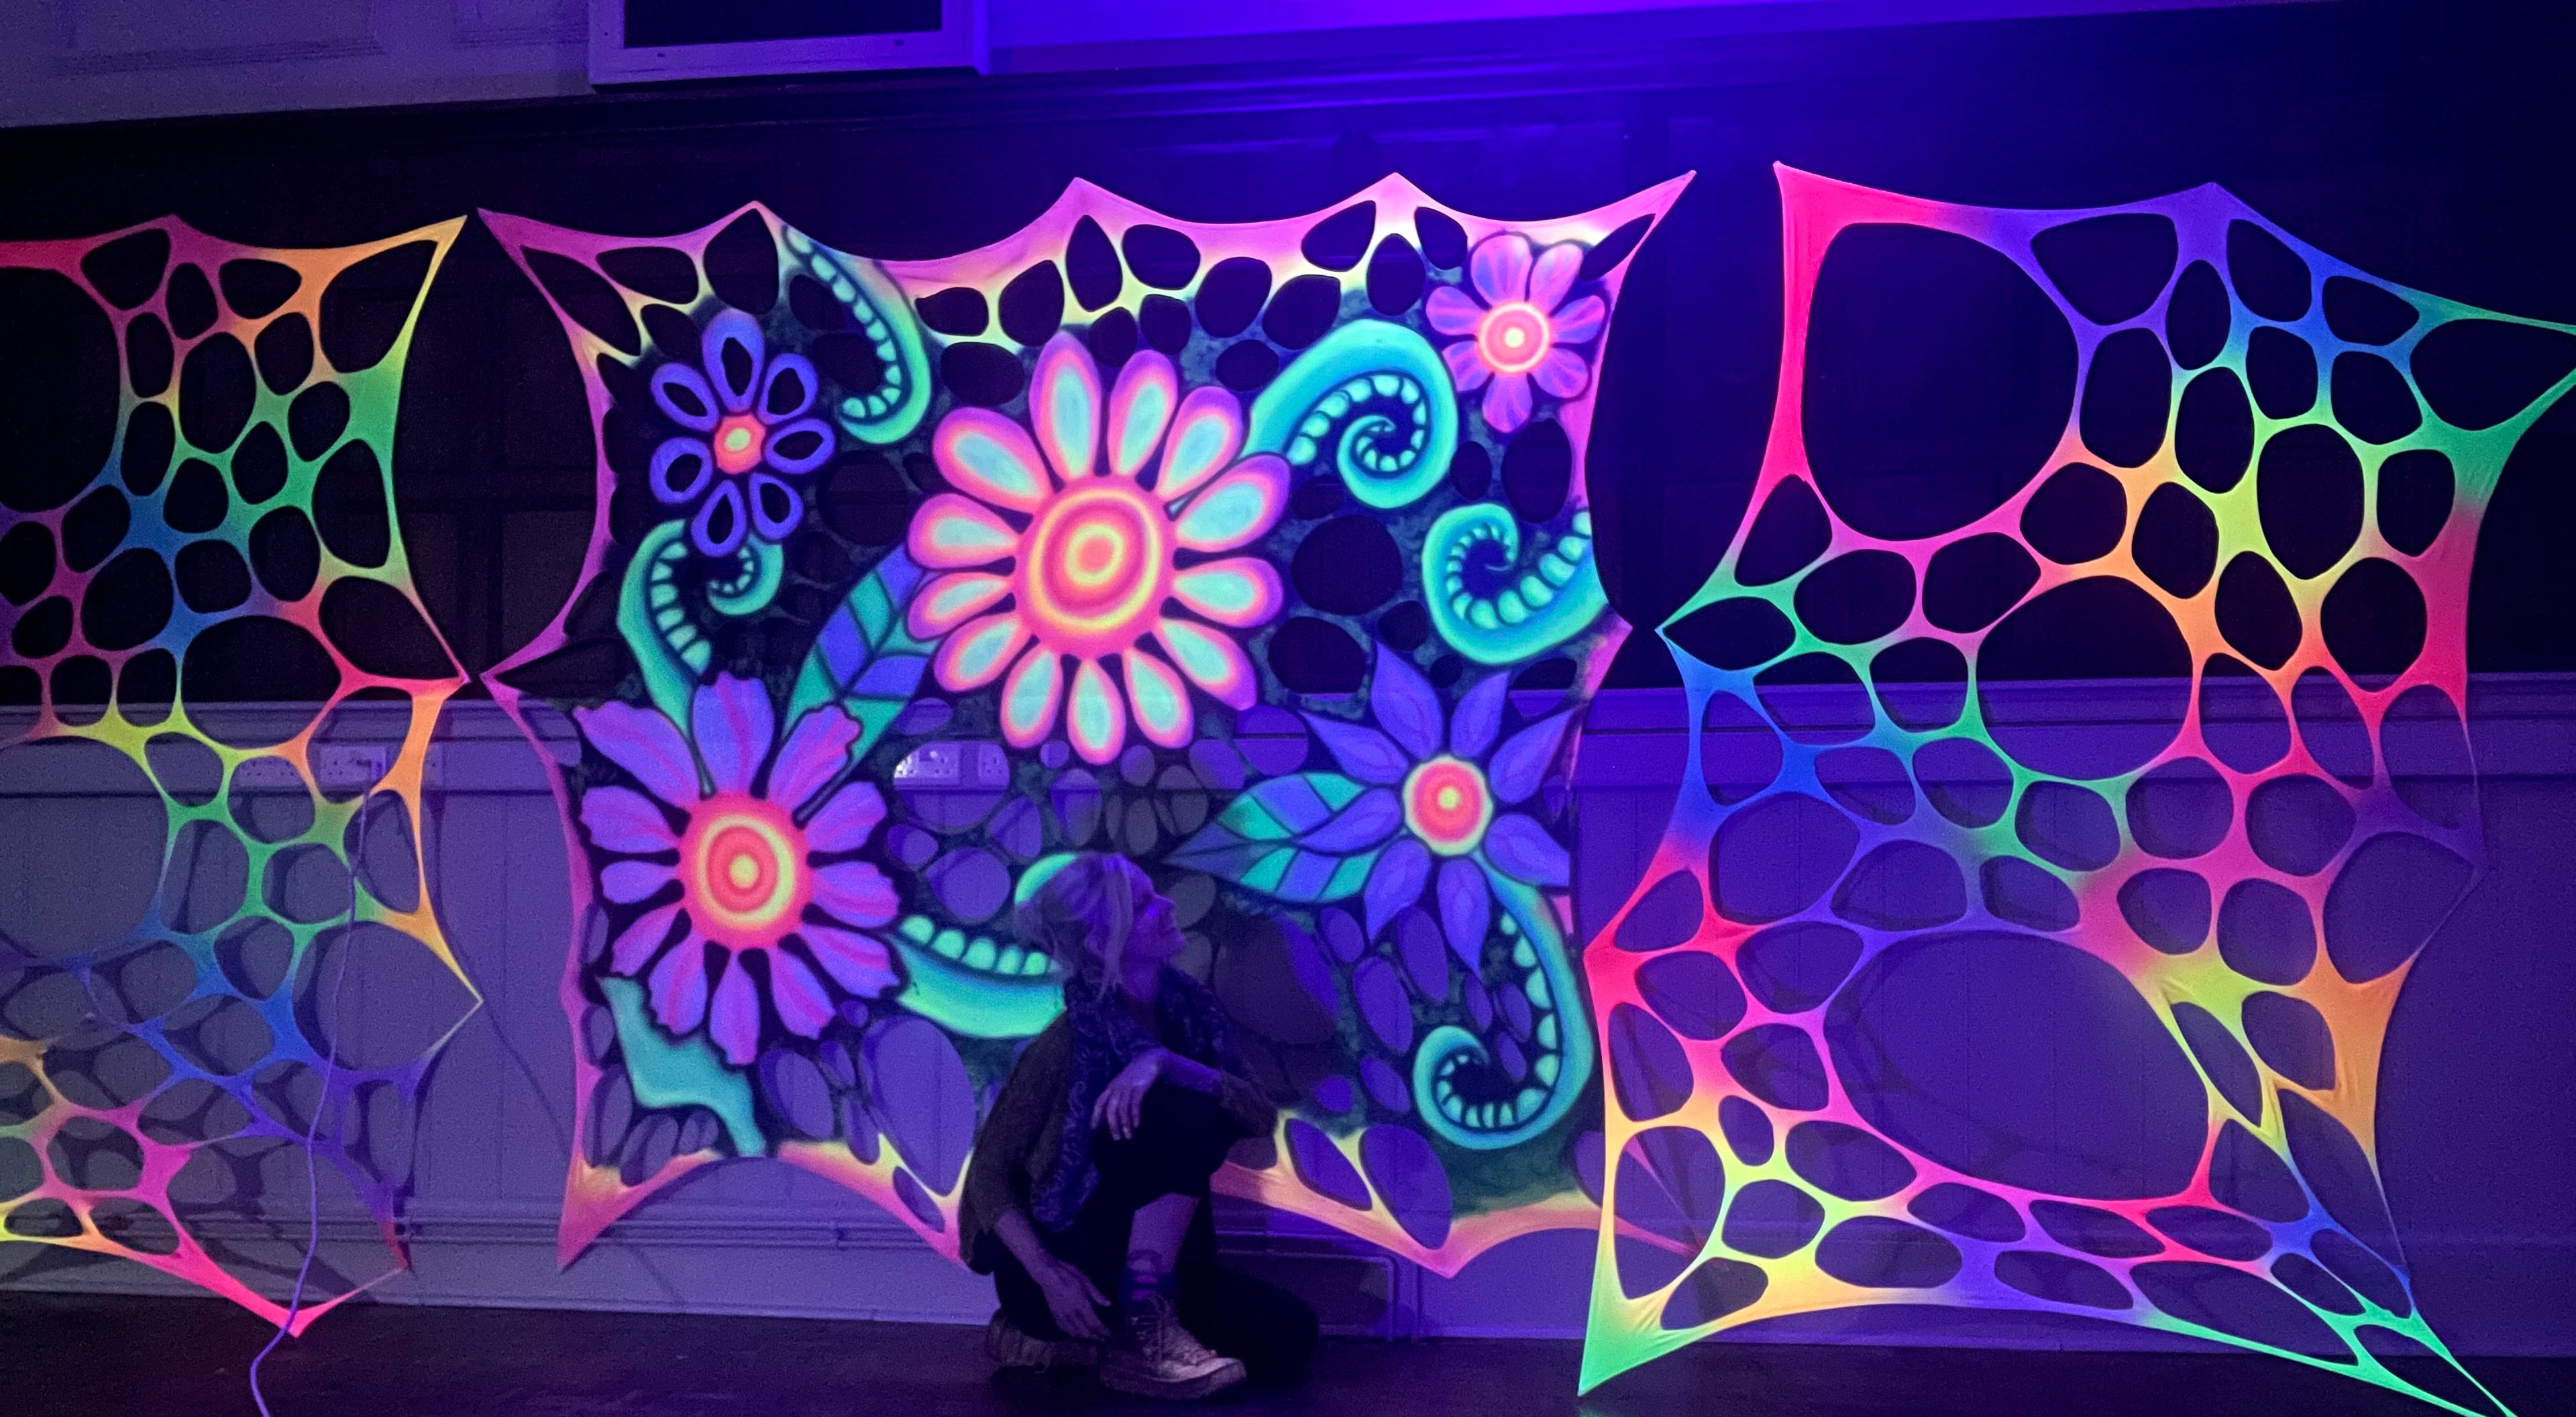 Load video: glowing decorations for festivals